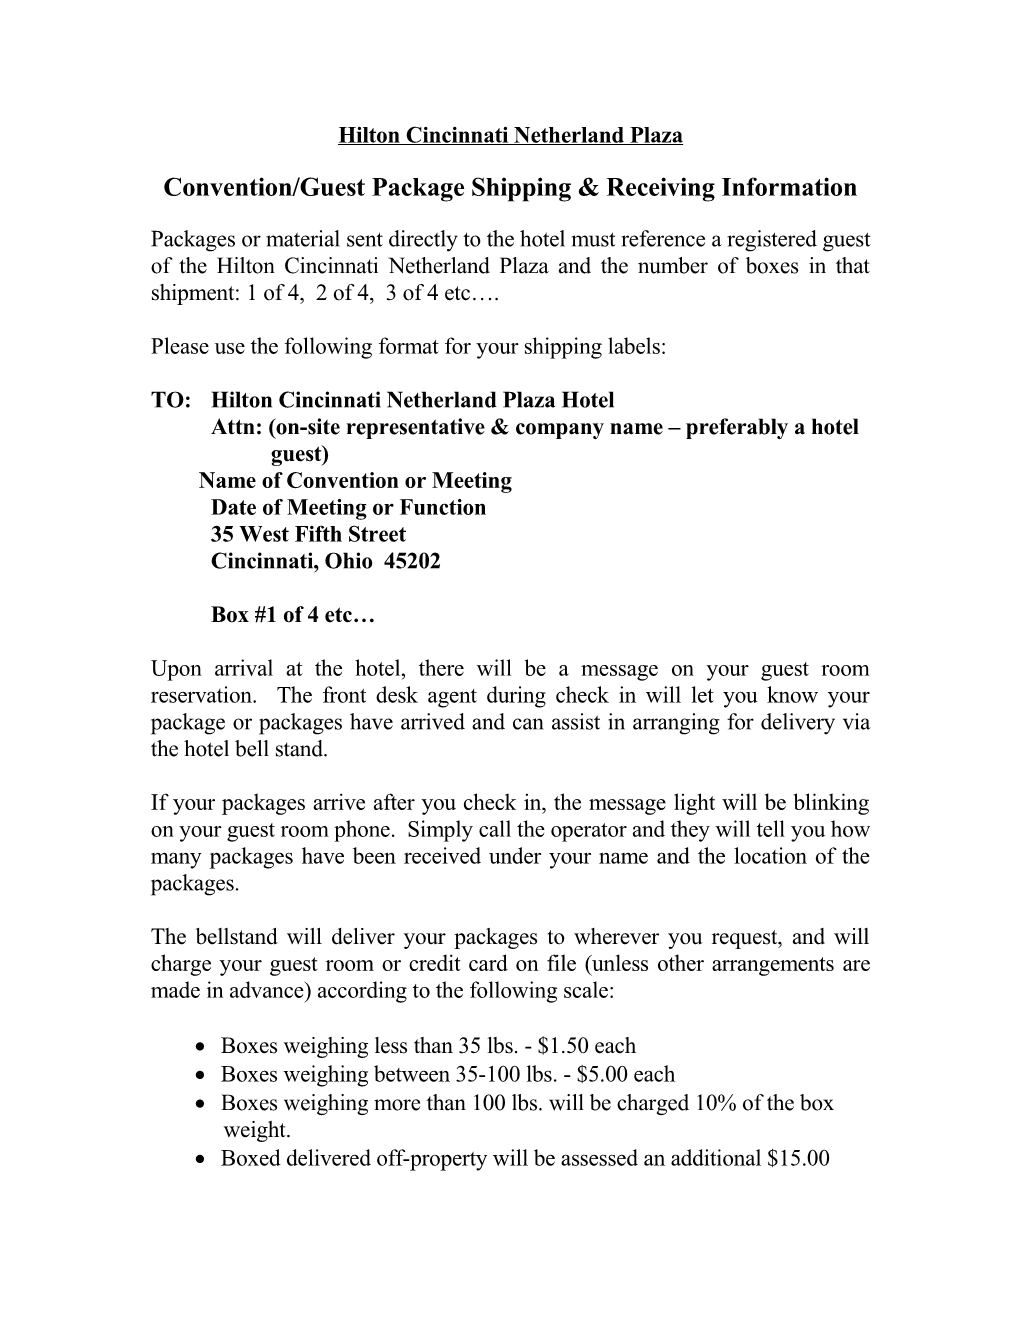 Convention/Guest Package Shipping & Receiving Information